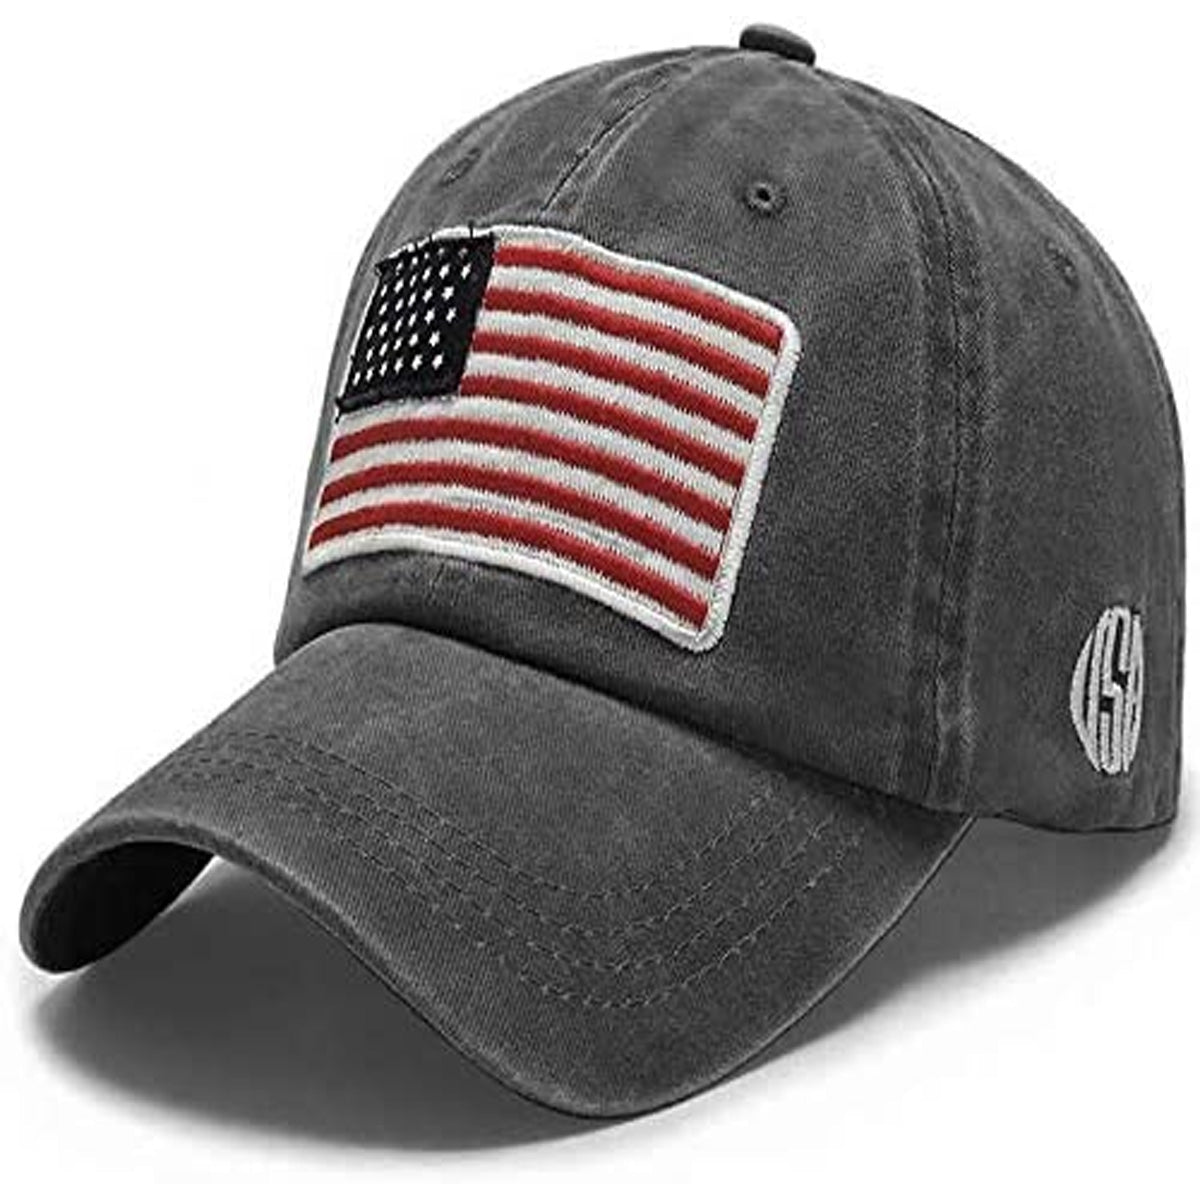 American Flag Hats - Vintage Black - Southern Grace Creations